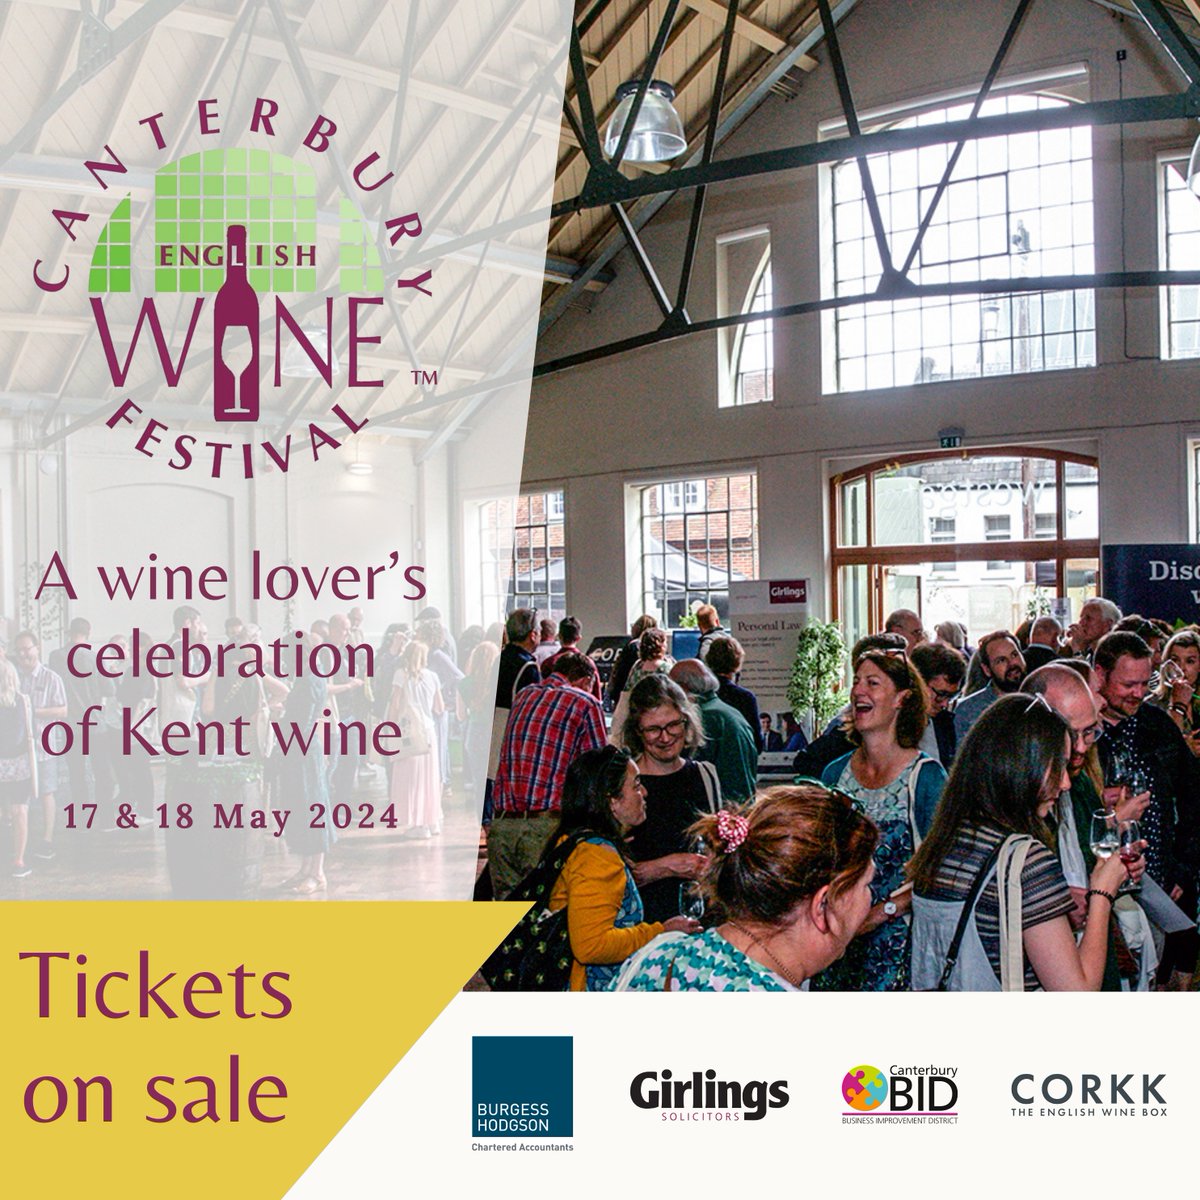 The ultimate wine-tasting event is coming to Canterbury this summer. Join us for the #CanterburyWineFestival at the @WestgateHall on 17 & 18 May. Save on your early bird tickets: from £35pp - Buy your tickets at westgatehall.org/canterbury-win…